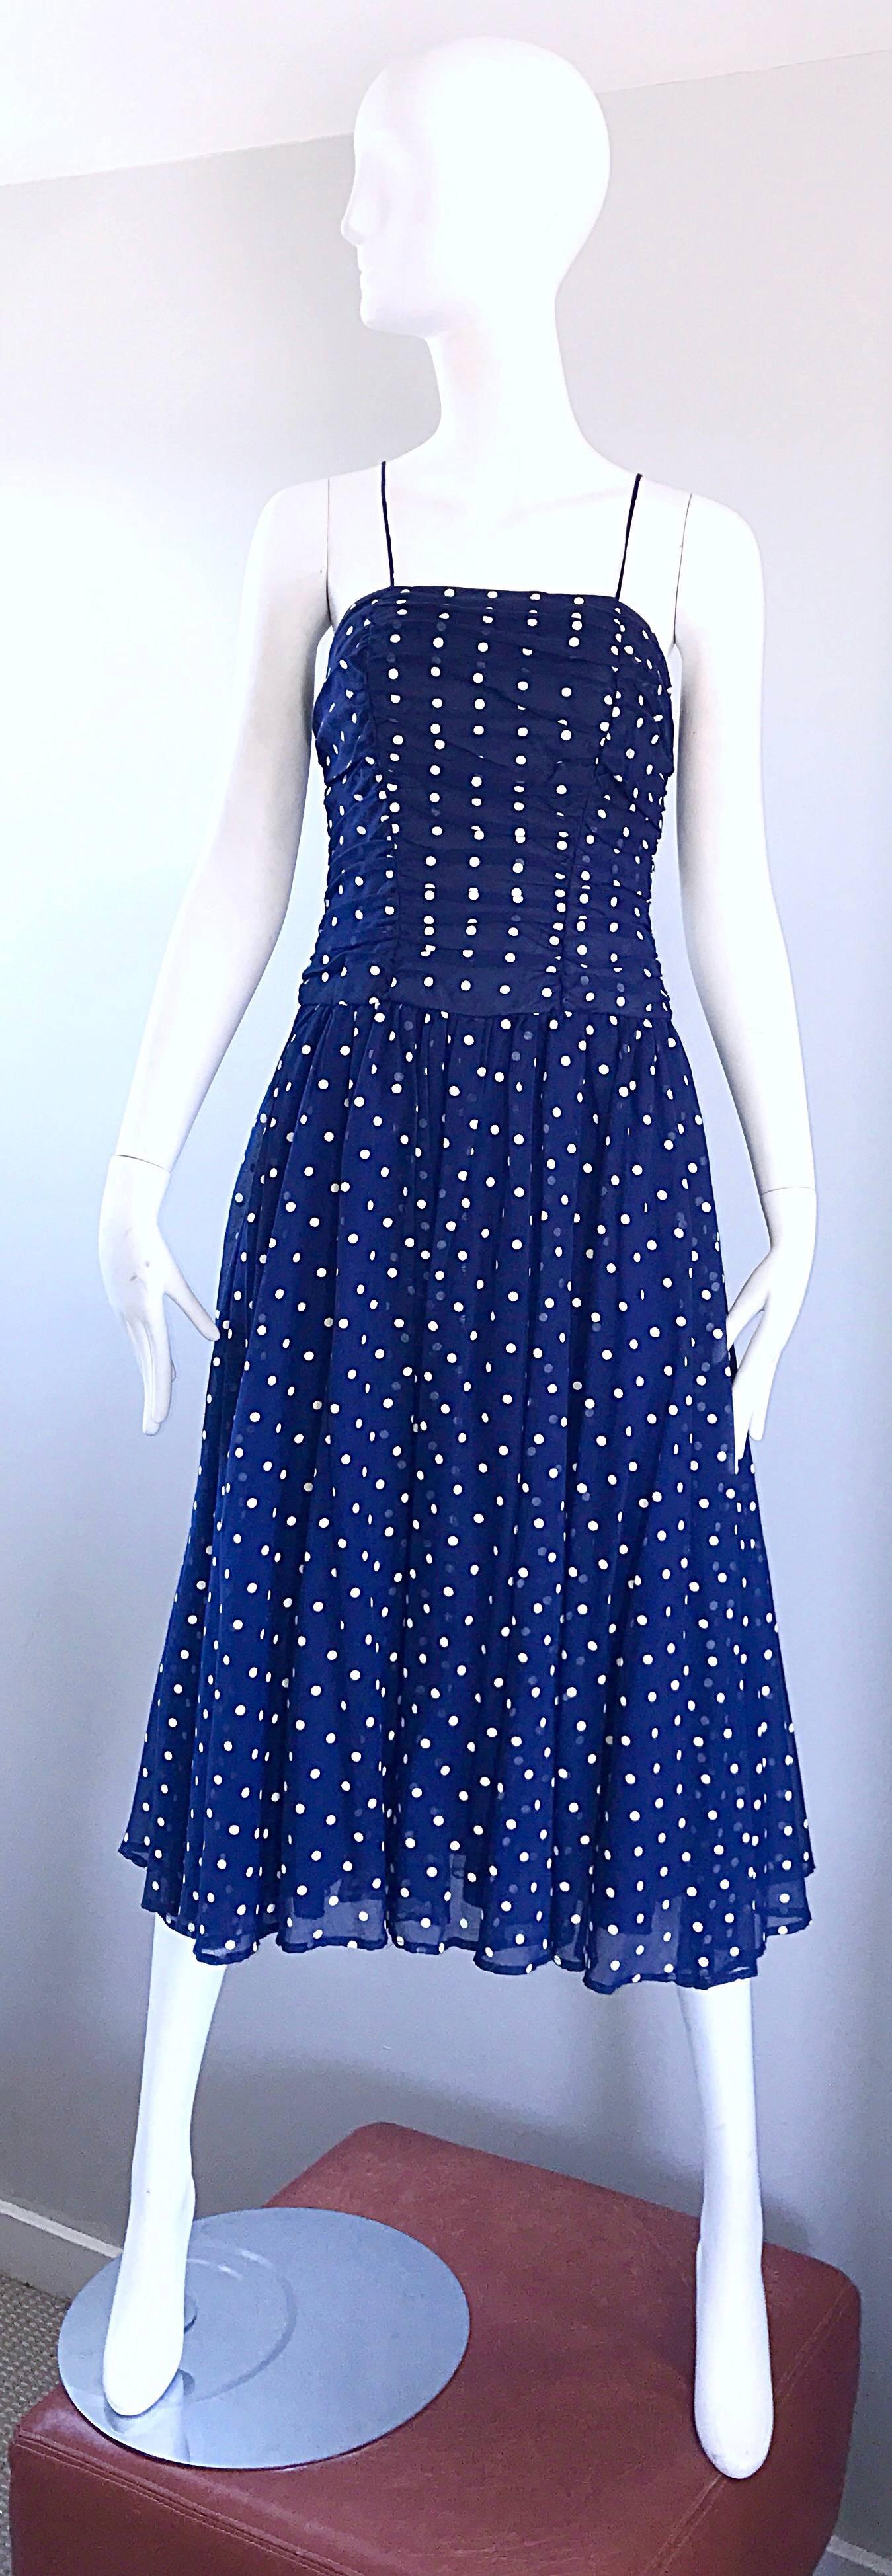 Chic vintage navy blue and white hand painted flirty spaghetti strap midi dress! Features a flattering ruched bodice and a forgiving full skirt. Layers of the skirt give the perfect flowy effect when worn. Fantastic quality with no designer labels